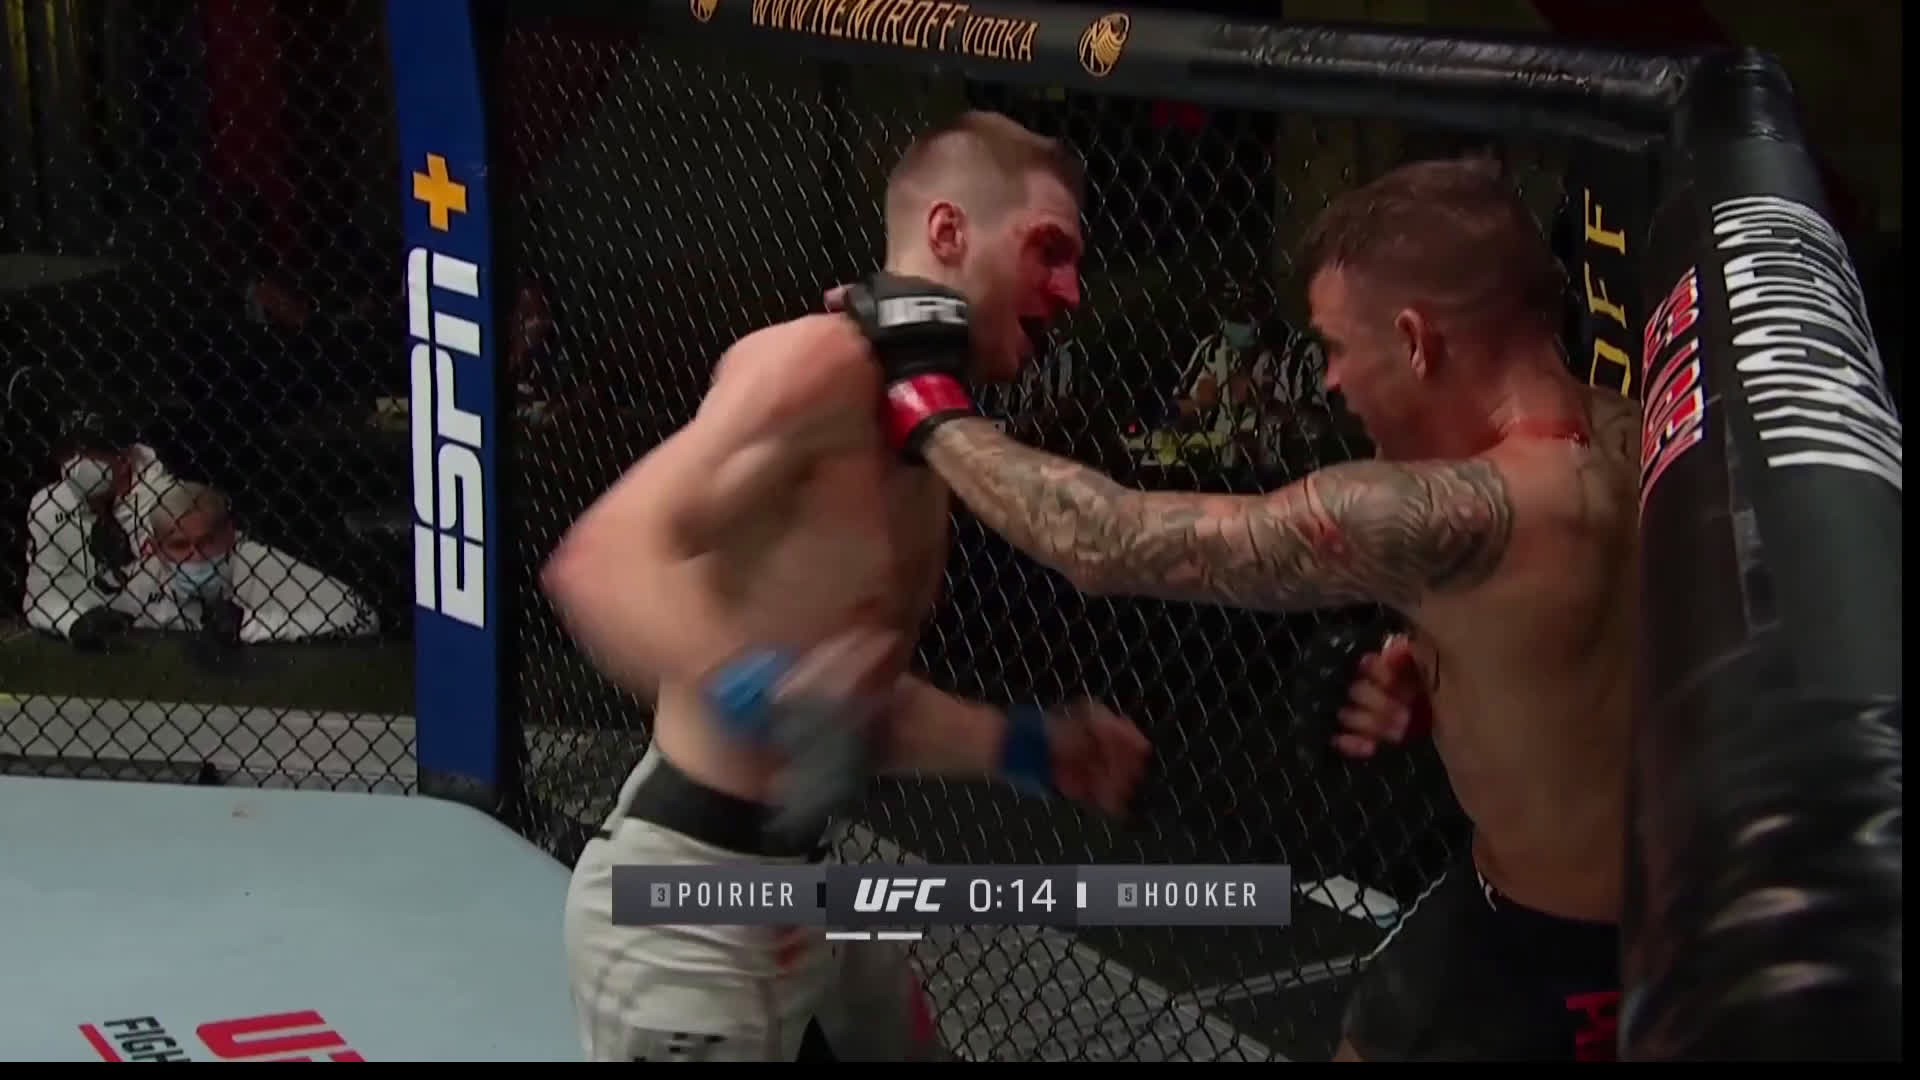 Dan Hooker and Dustin Poirier end round 2 in brutal fashion during their contender for fight of the year 2020 r/MMA